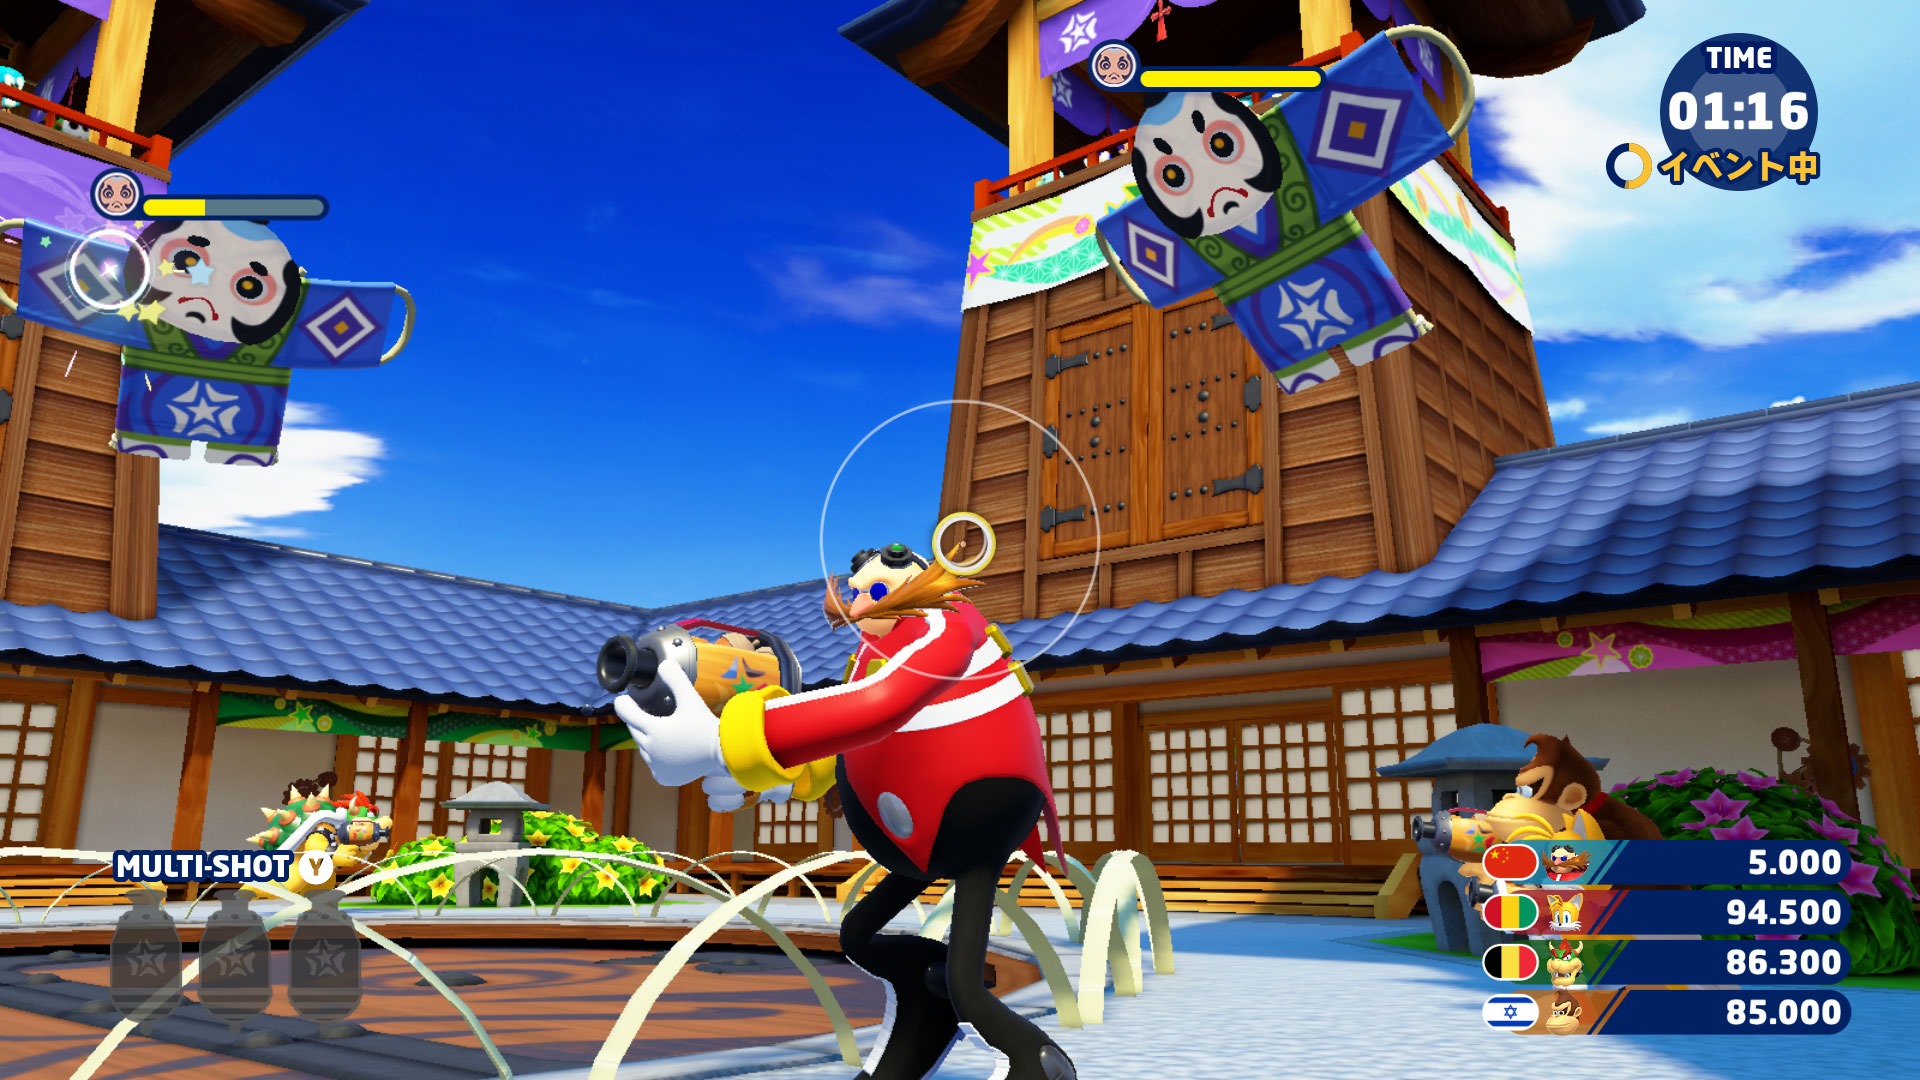 Mario and Sonic At The Olympic Games Tokyo 2020 Details Story Mode, Dream Shooting